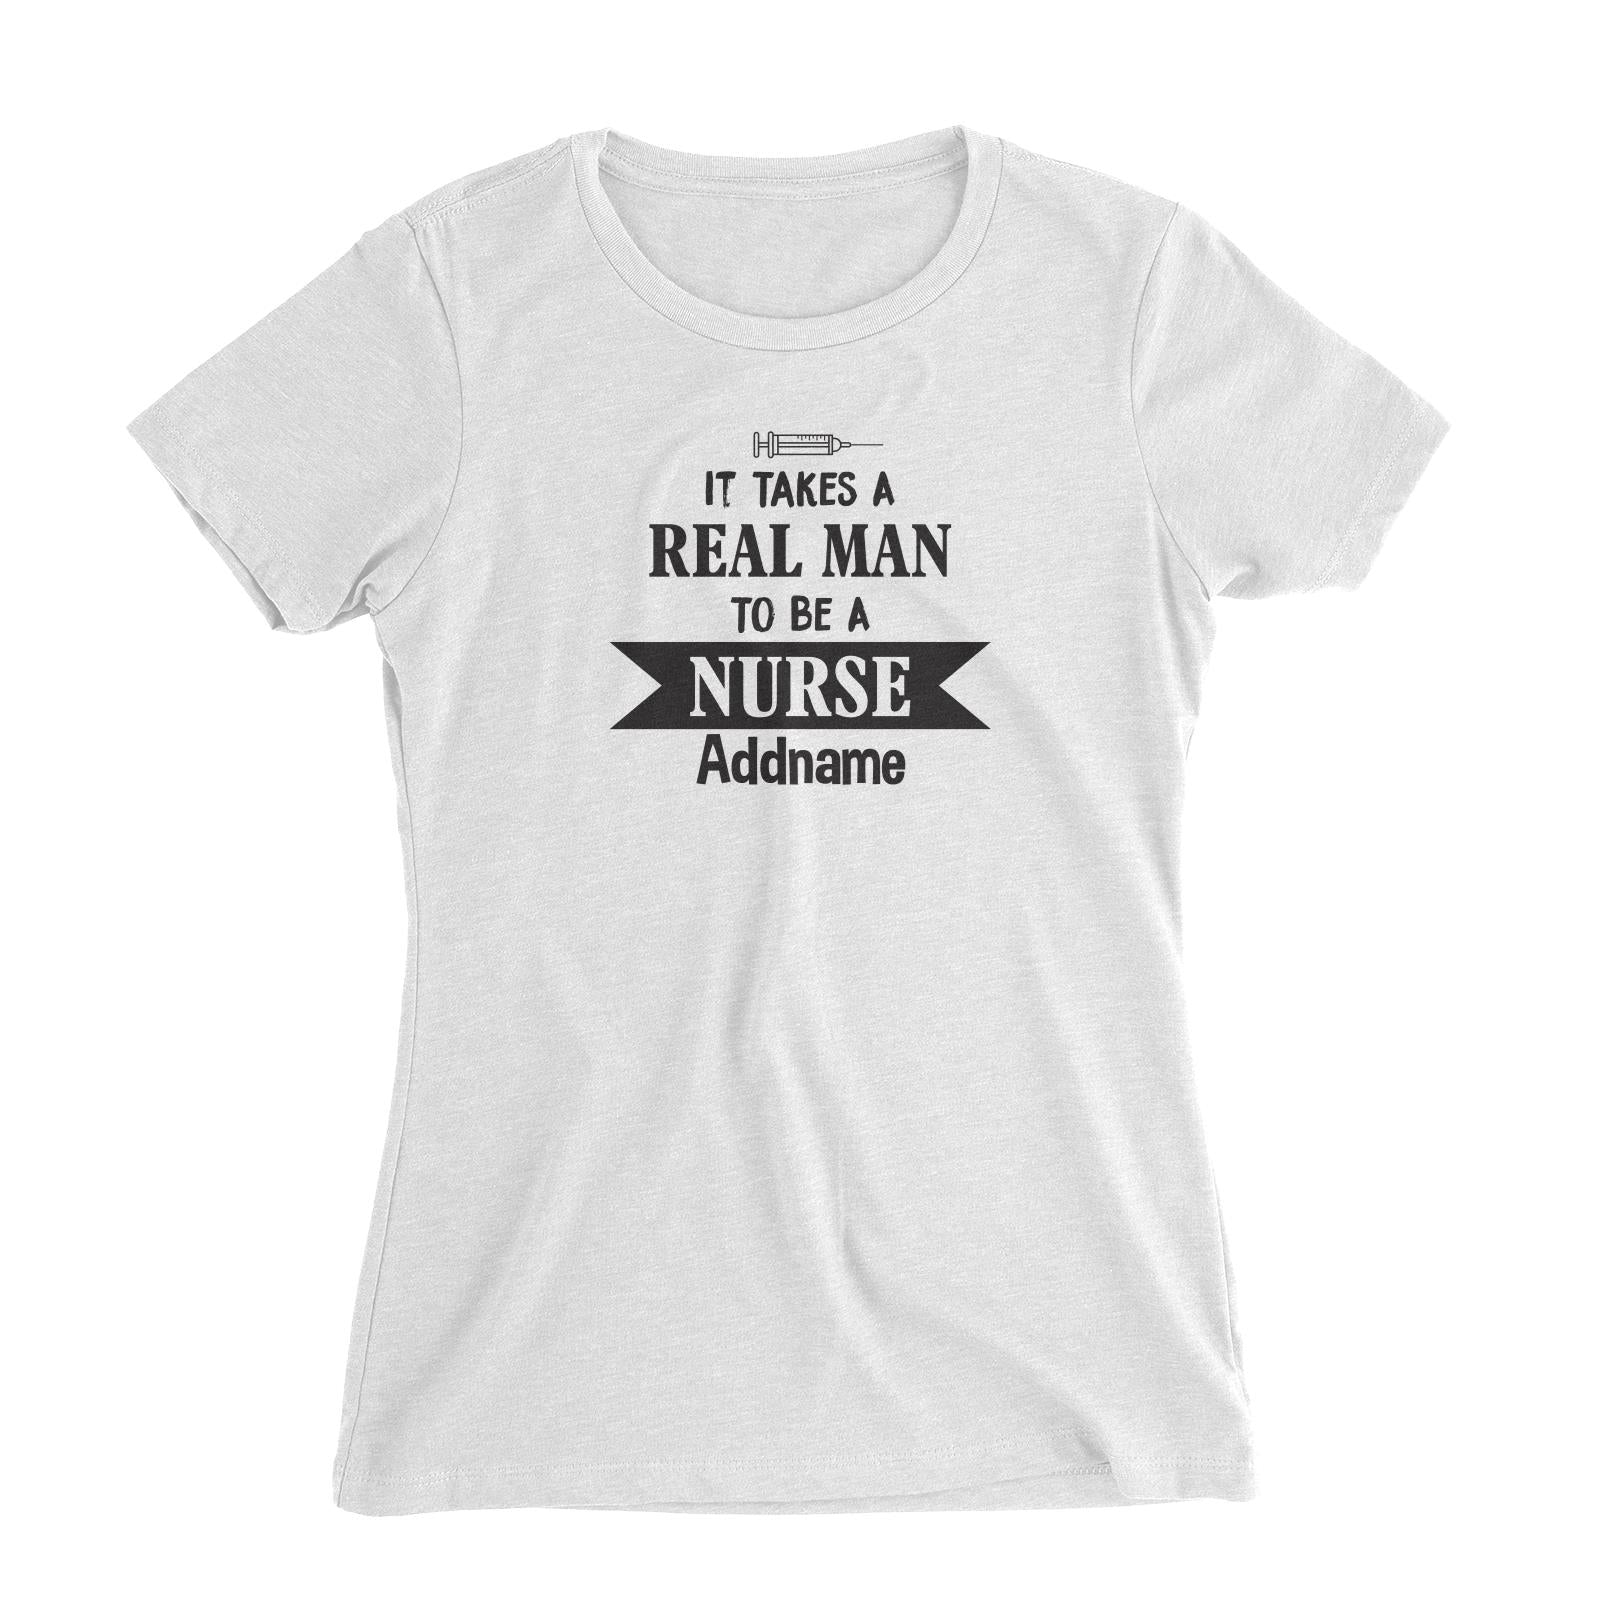 It Takes a Real Man to be a Nurse Women's Slim Fit T-Shirt